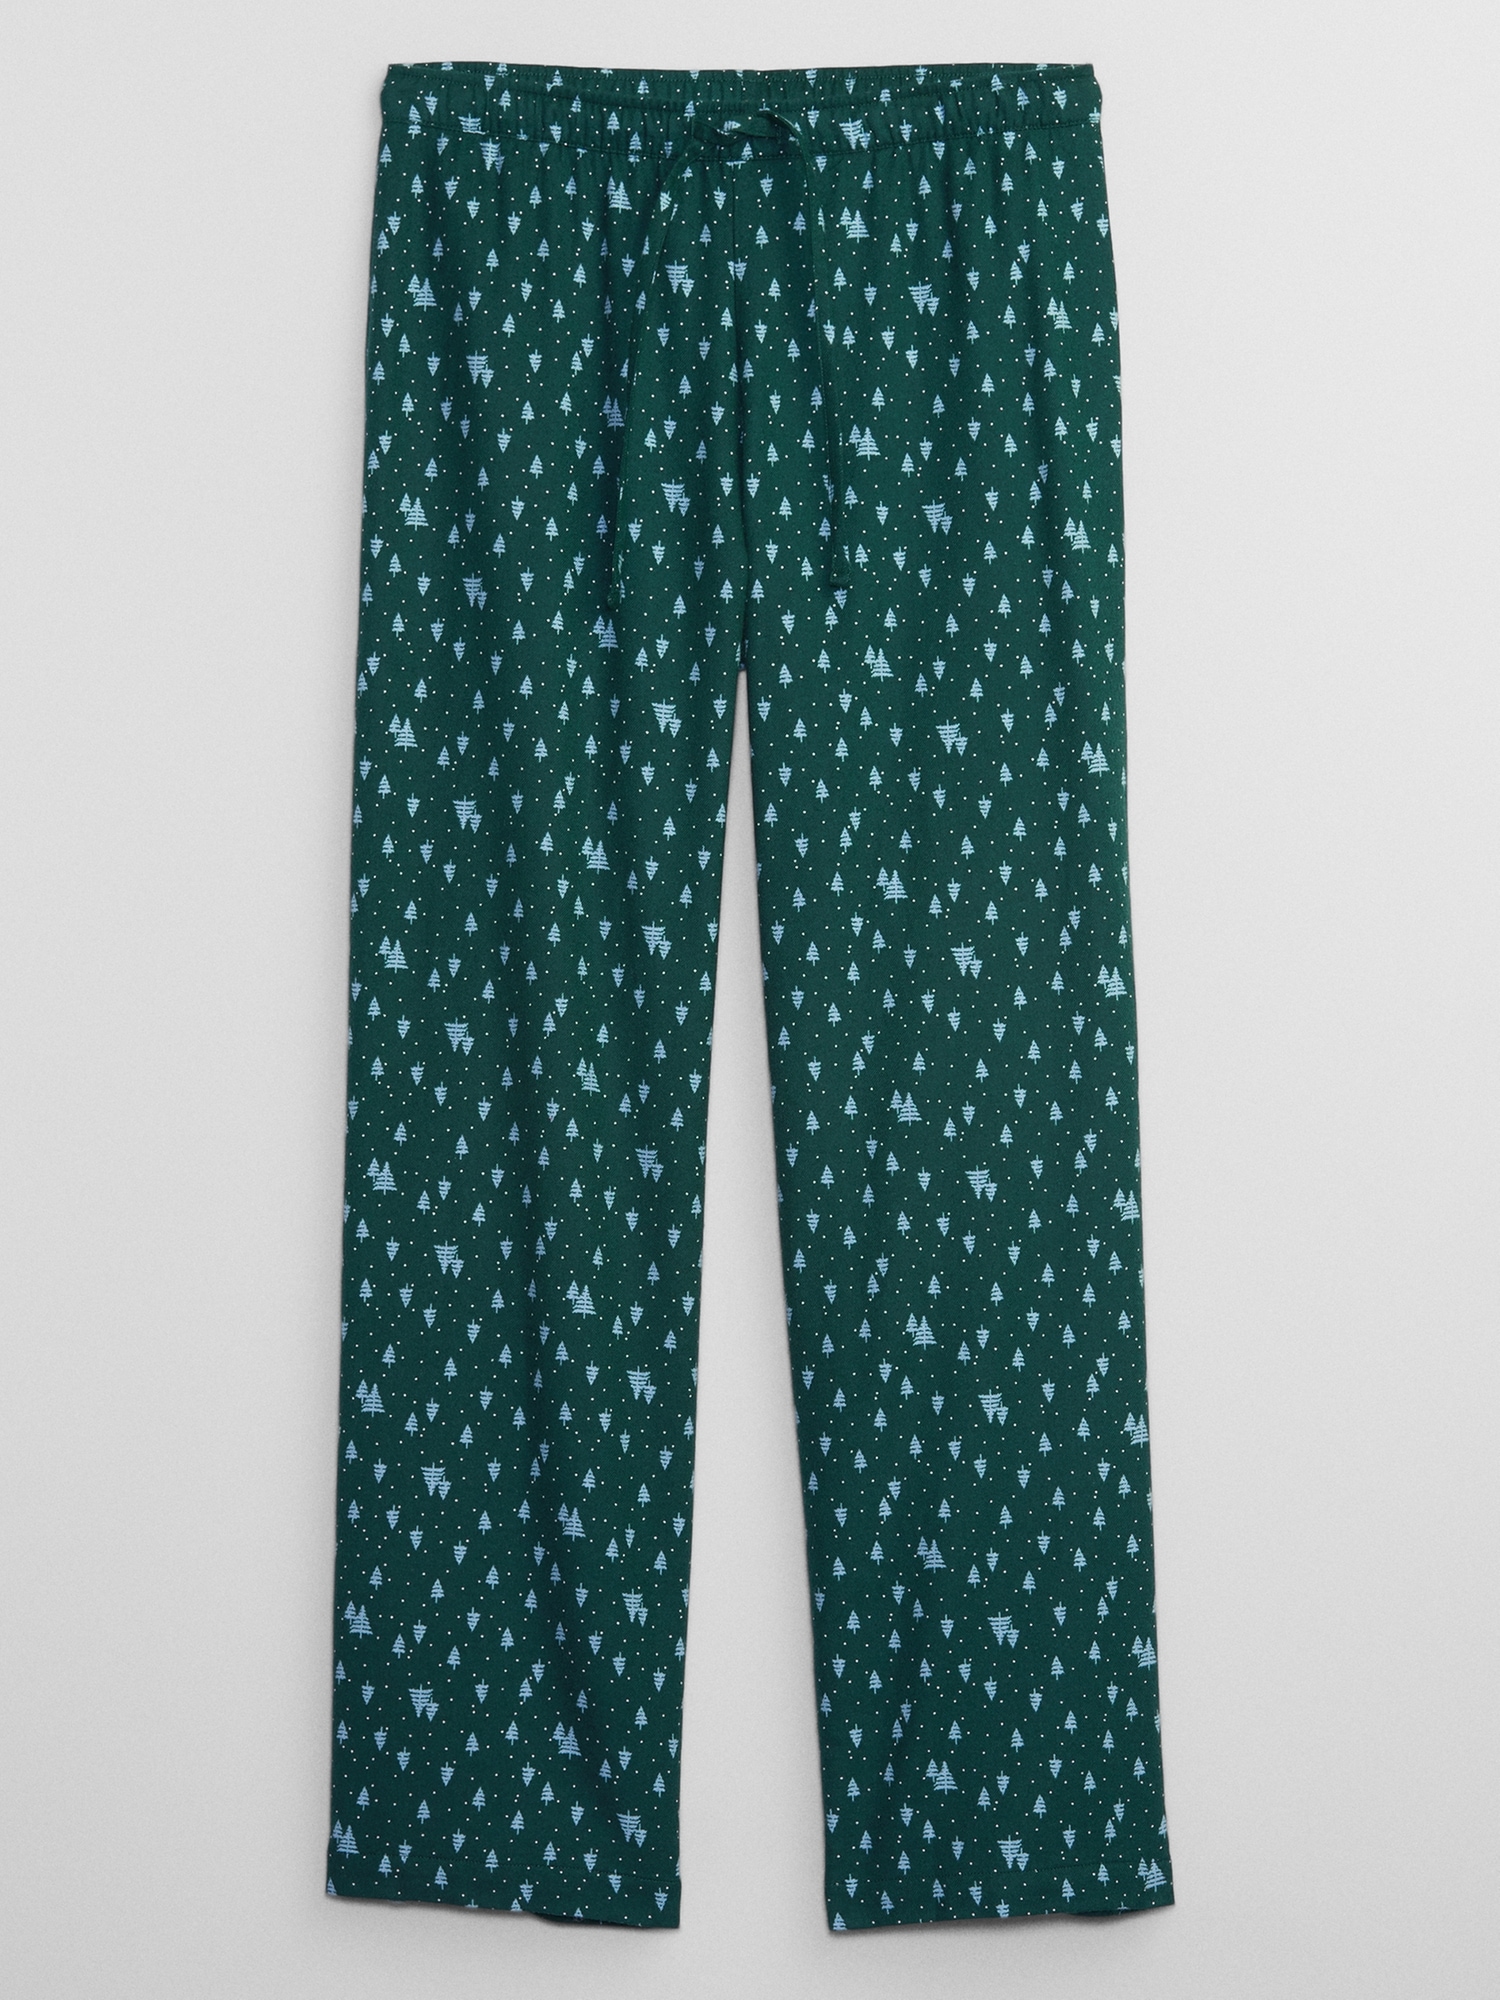 Relaxed Flannel PJ Pants | Gap Factory